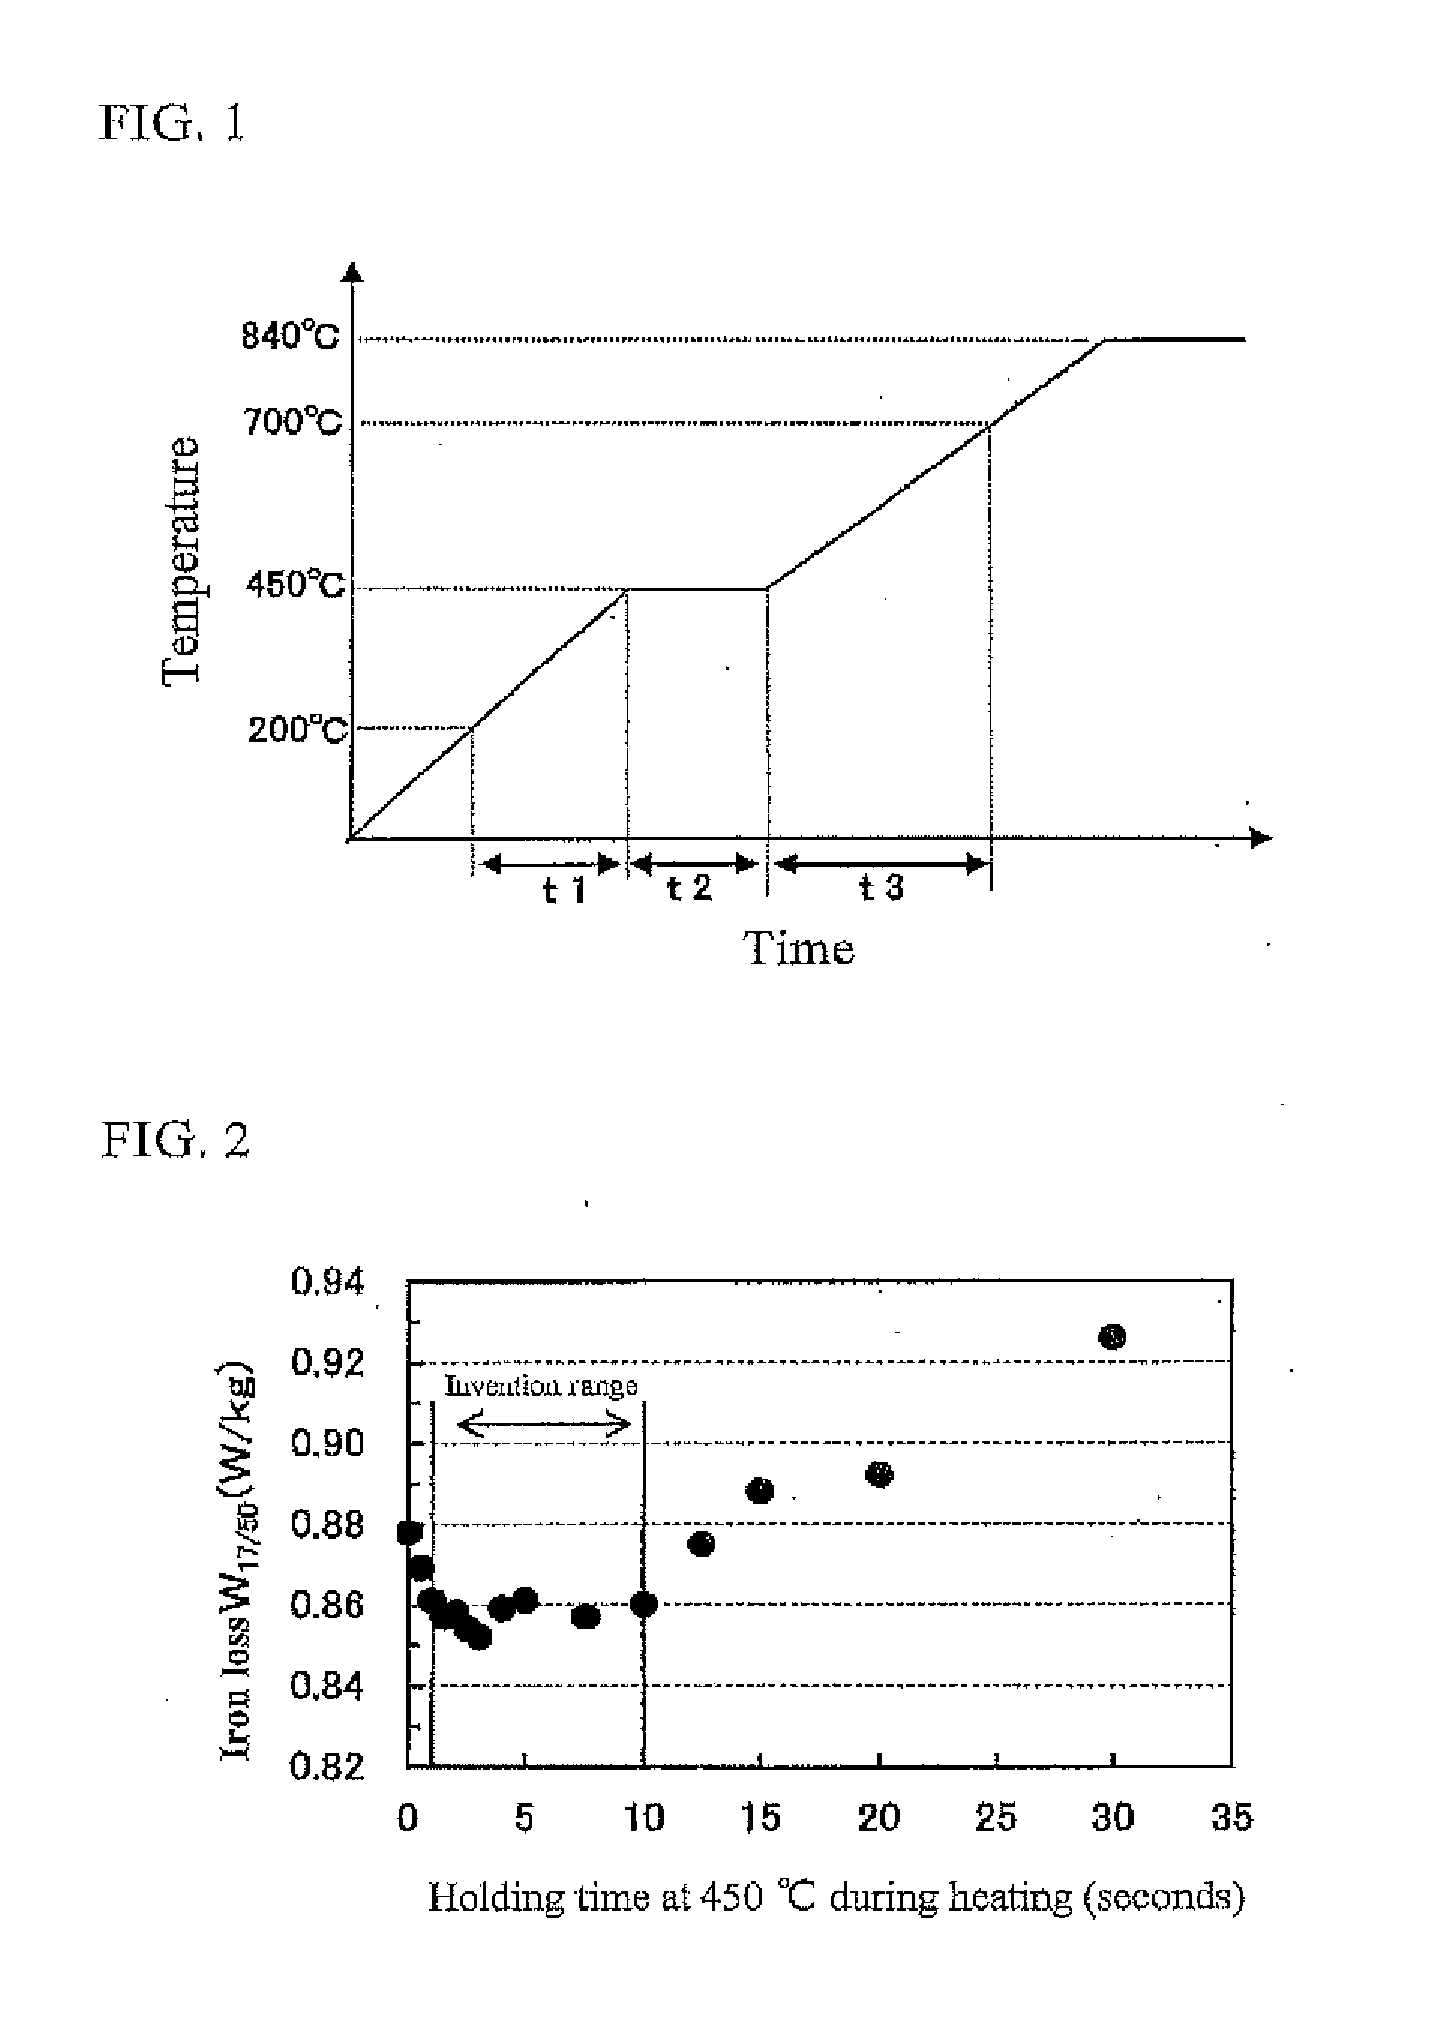 Method for producing grain-oriented electrical steel sheet